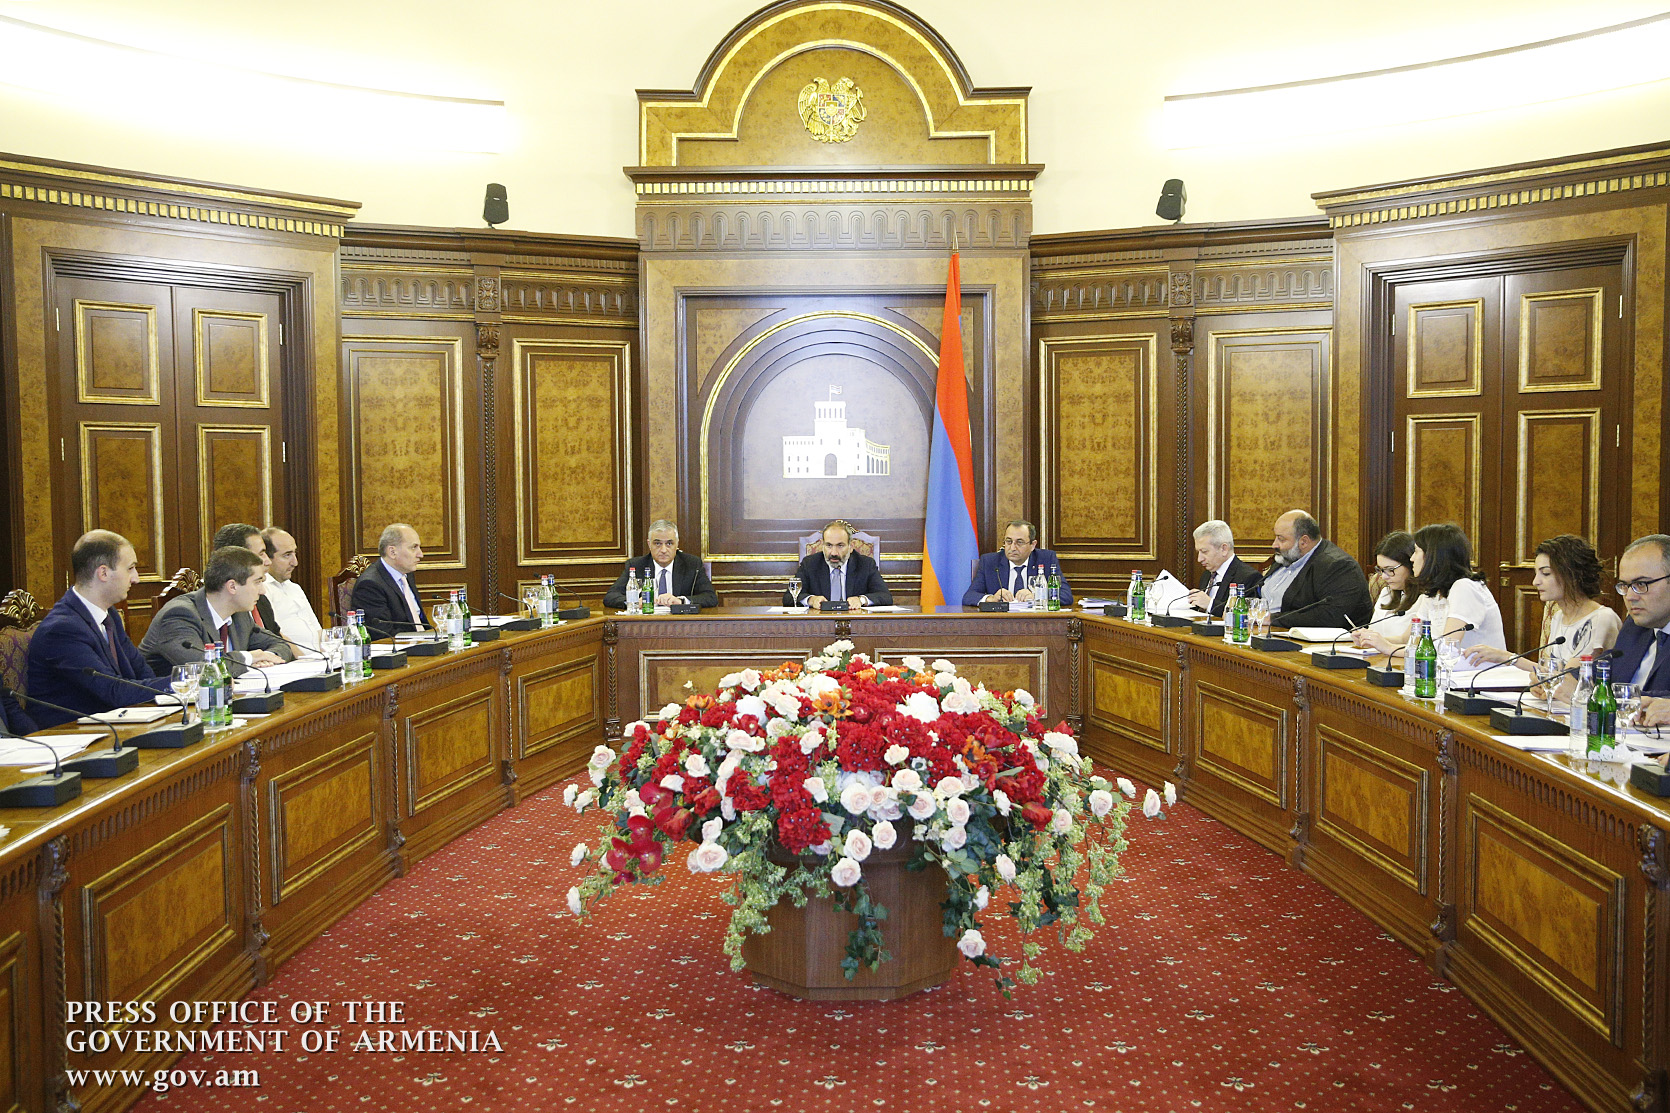 Nikol Pashinyan: ‘SME is an extremely important sector for the government’